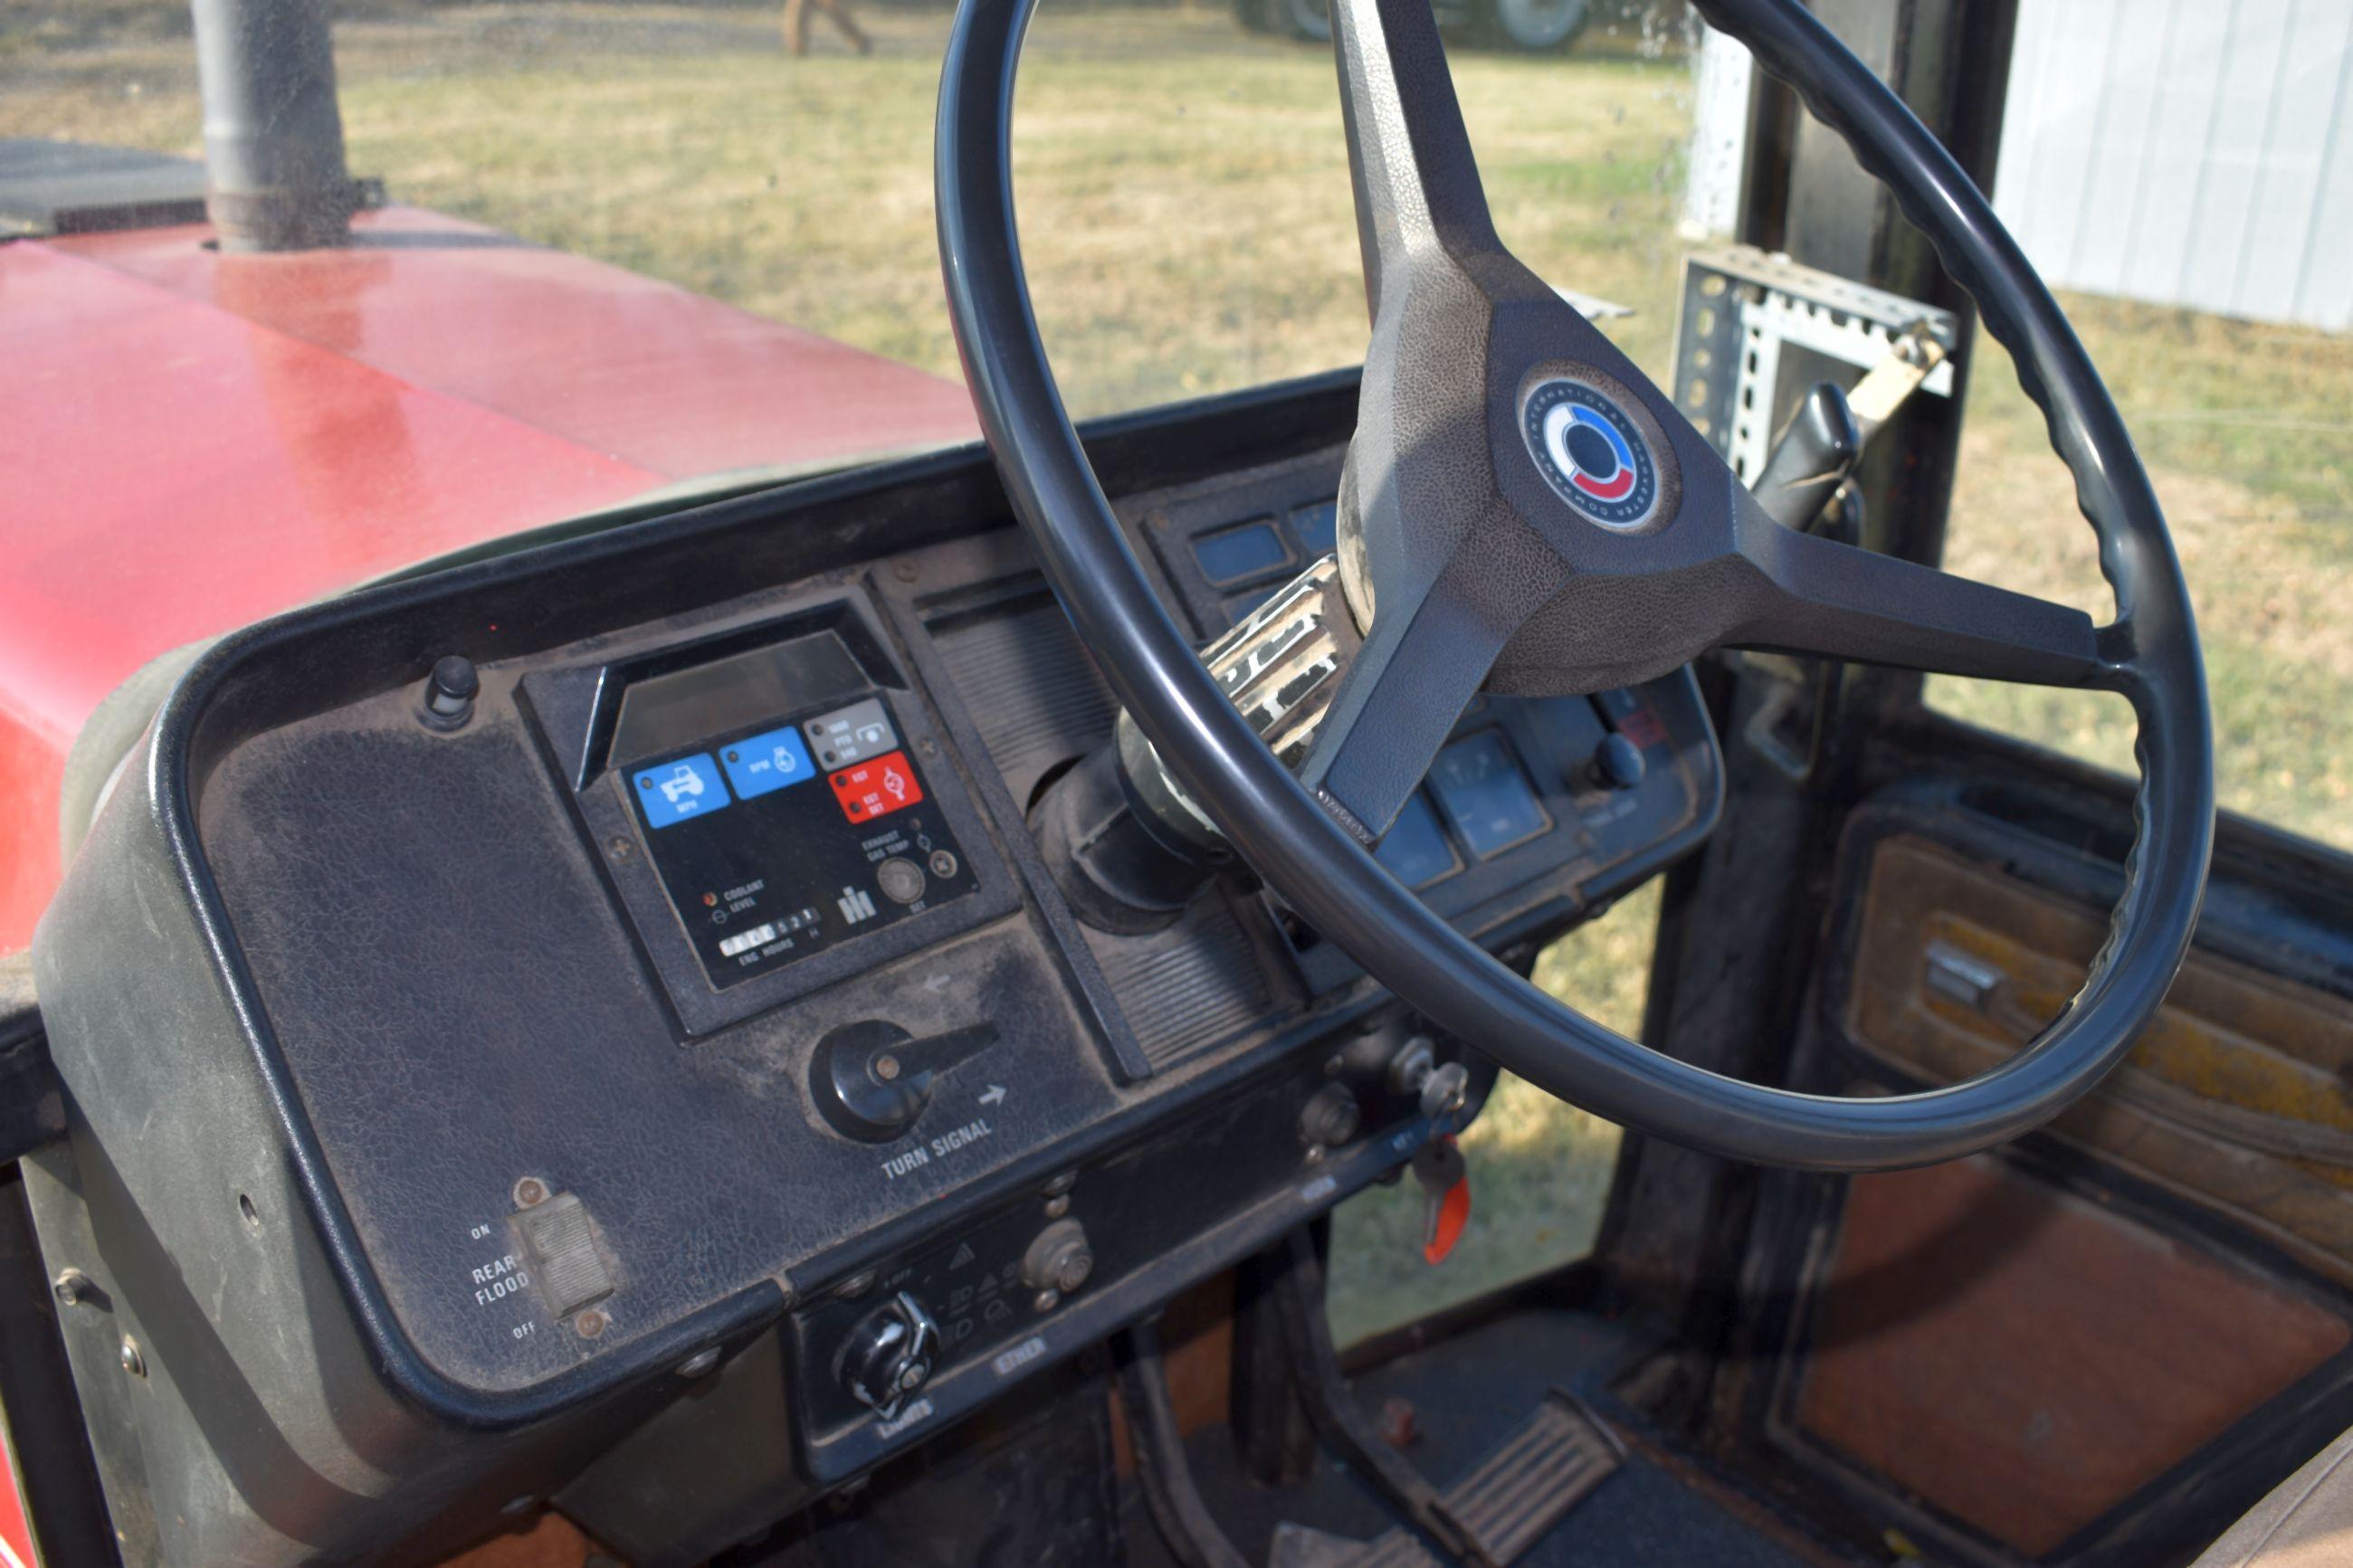 1982 IHC 5088, 2WD, 7,149 Hours, 18.4x38 Duals 65%, 3pt, 2hyd, 540/1000 PTO, 10 Suit Case Weights, E